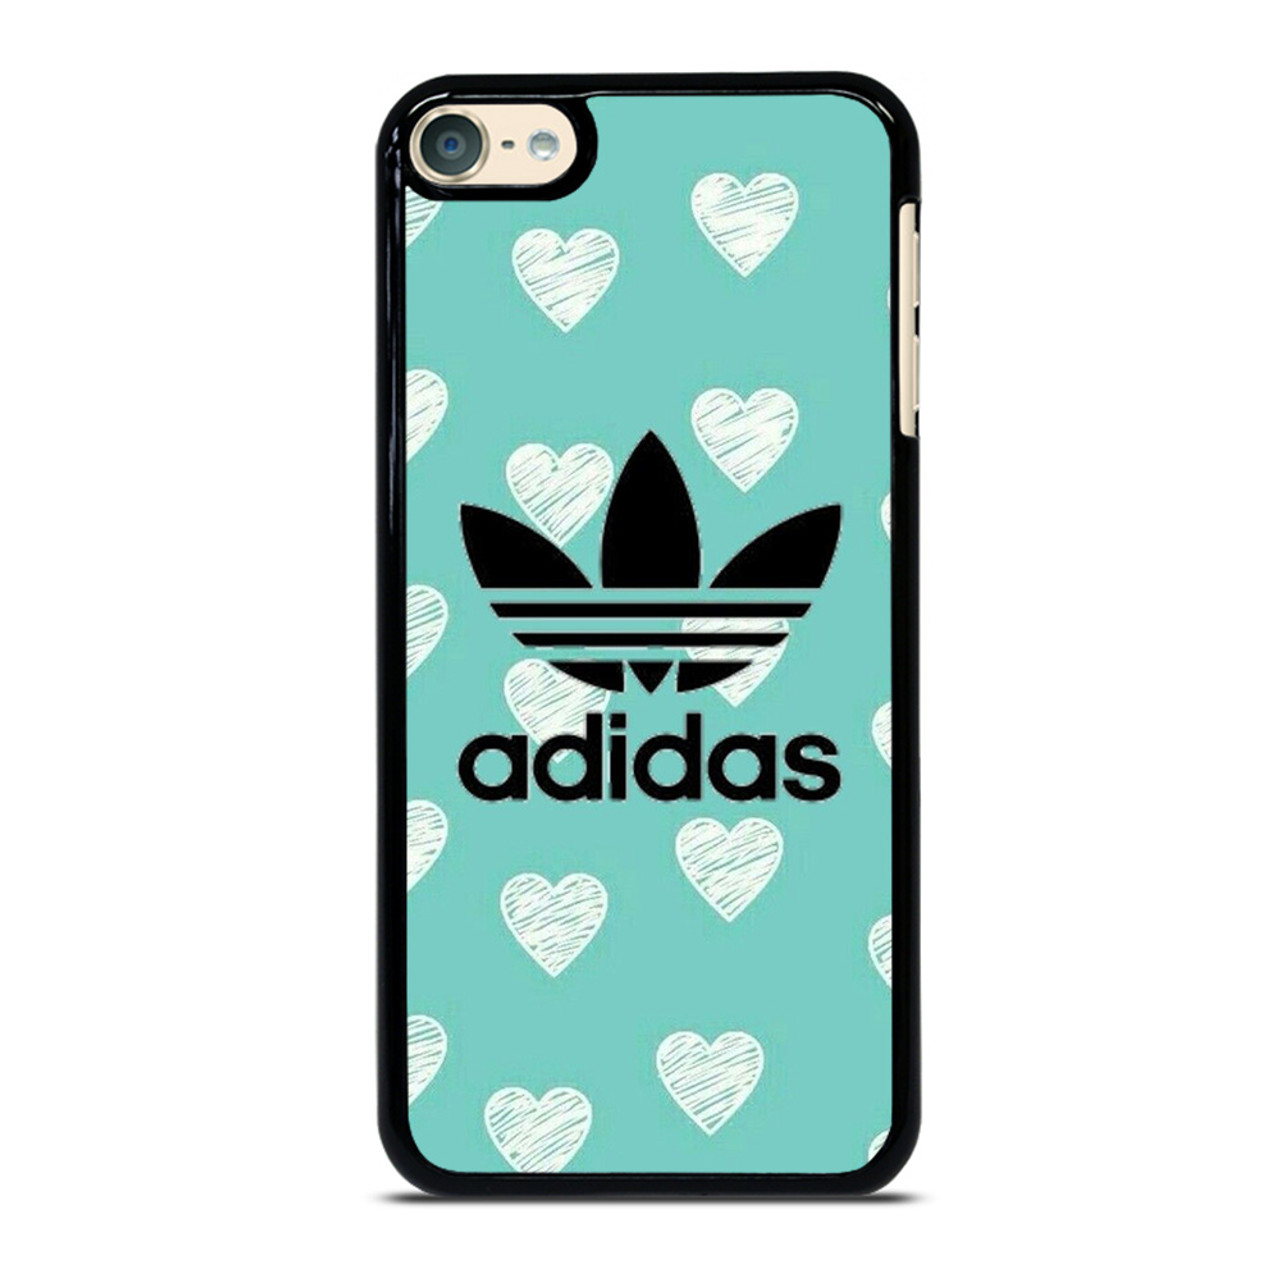 ADIDAS LOVE iPod 6 Case Cover